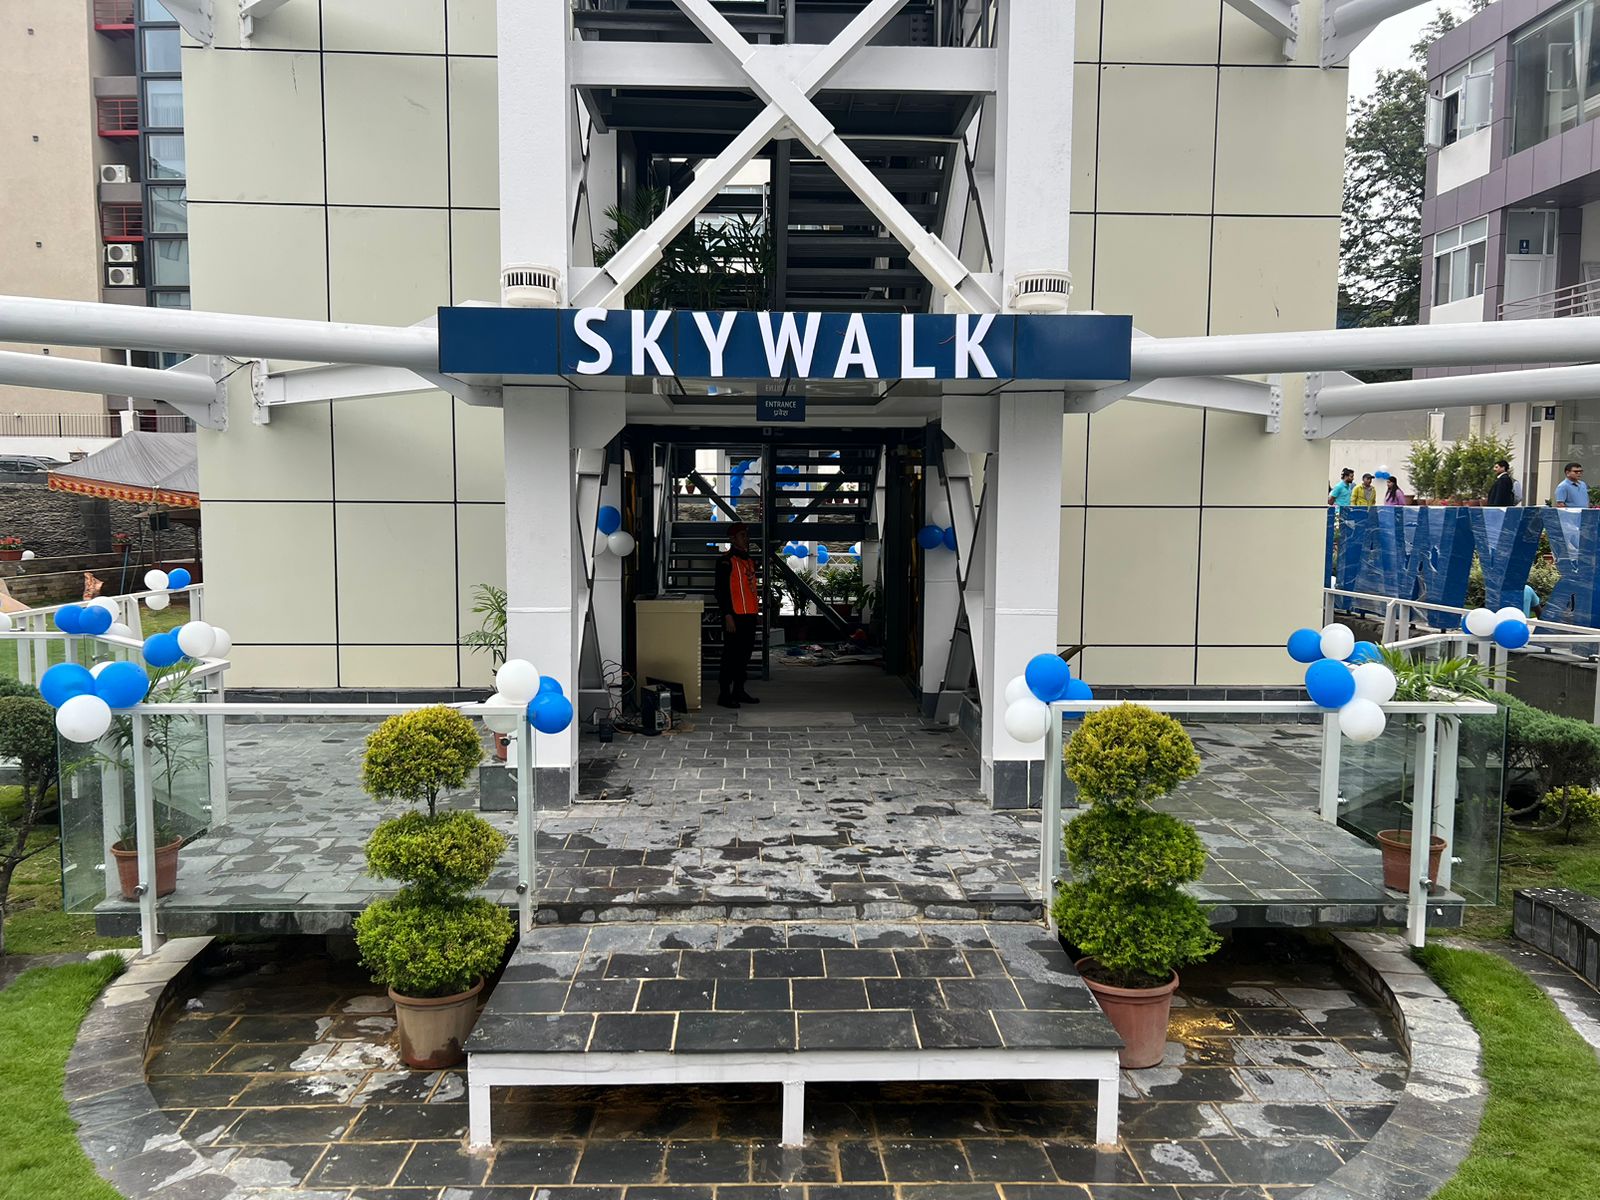 Legal procedures for Sky Walk cuccessfully concluded: Wonders Nepal